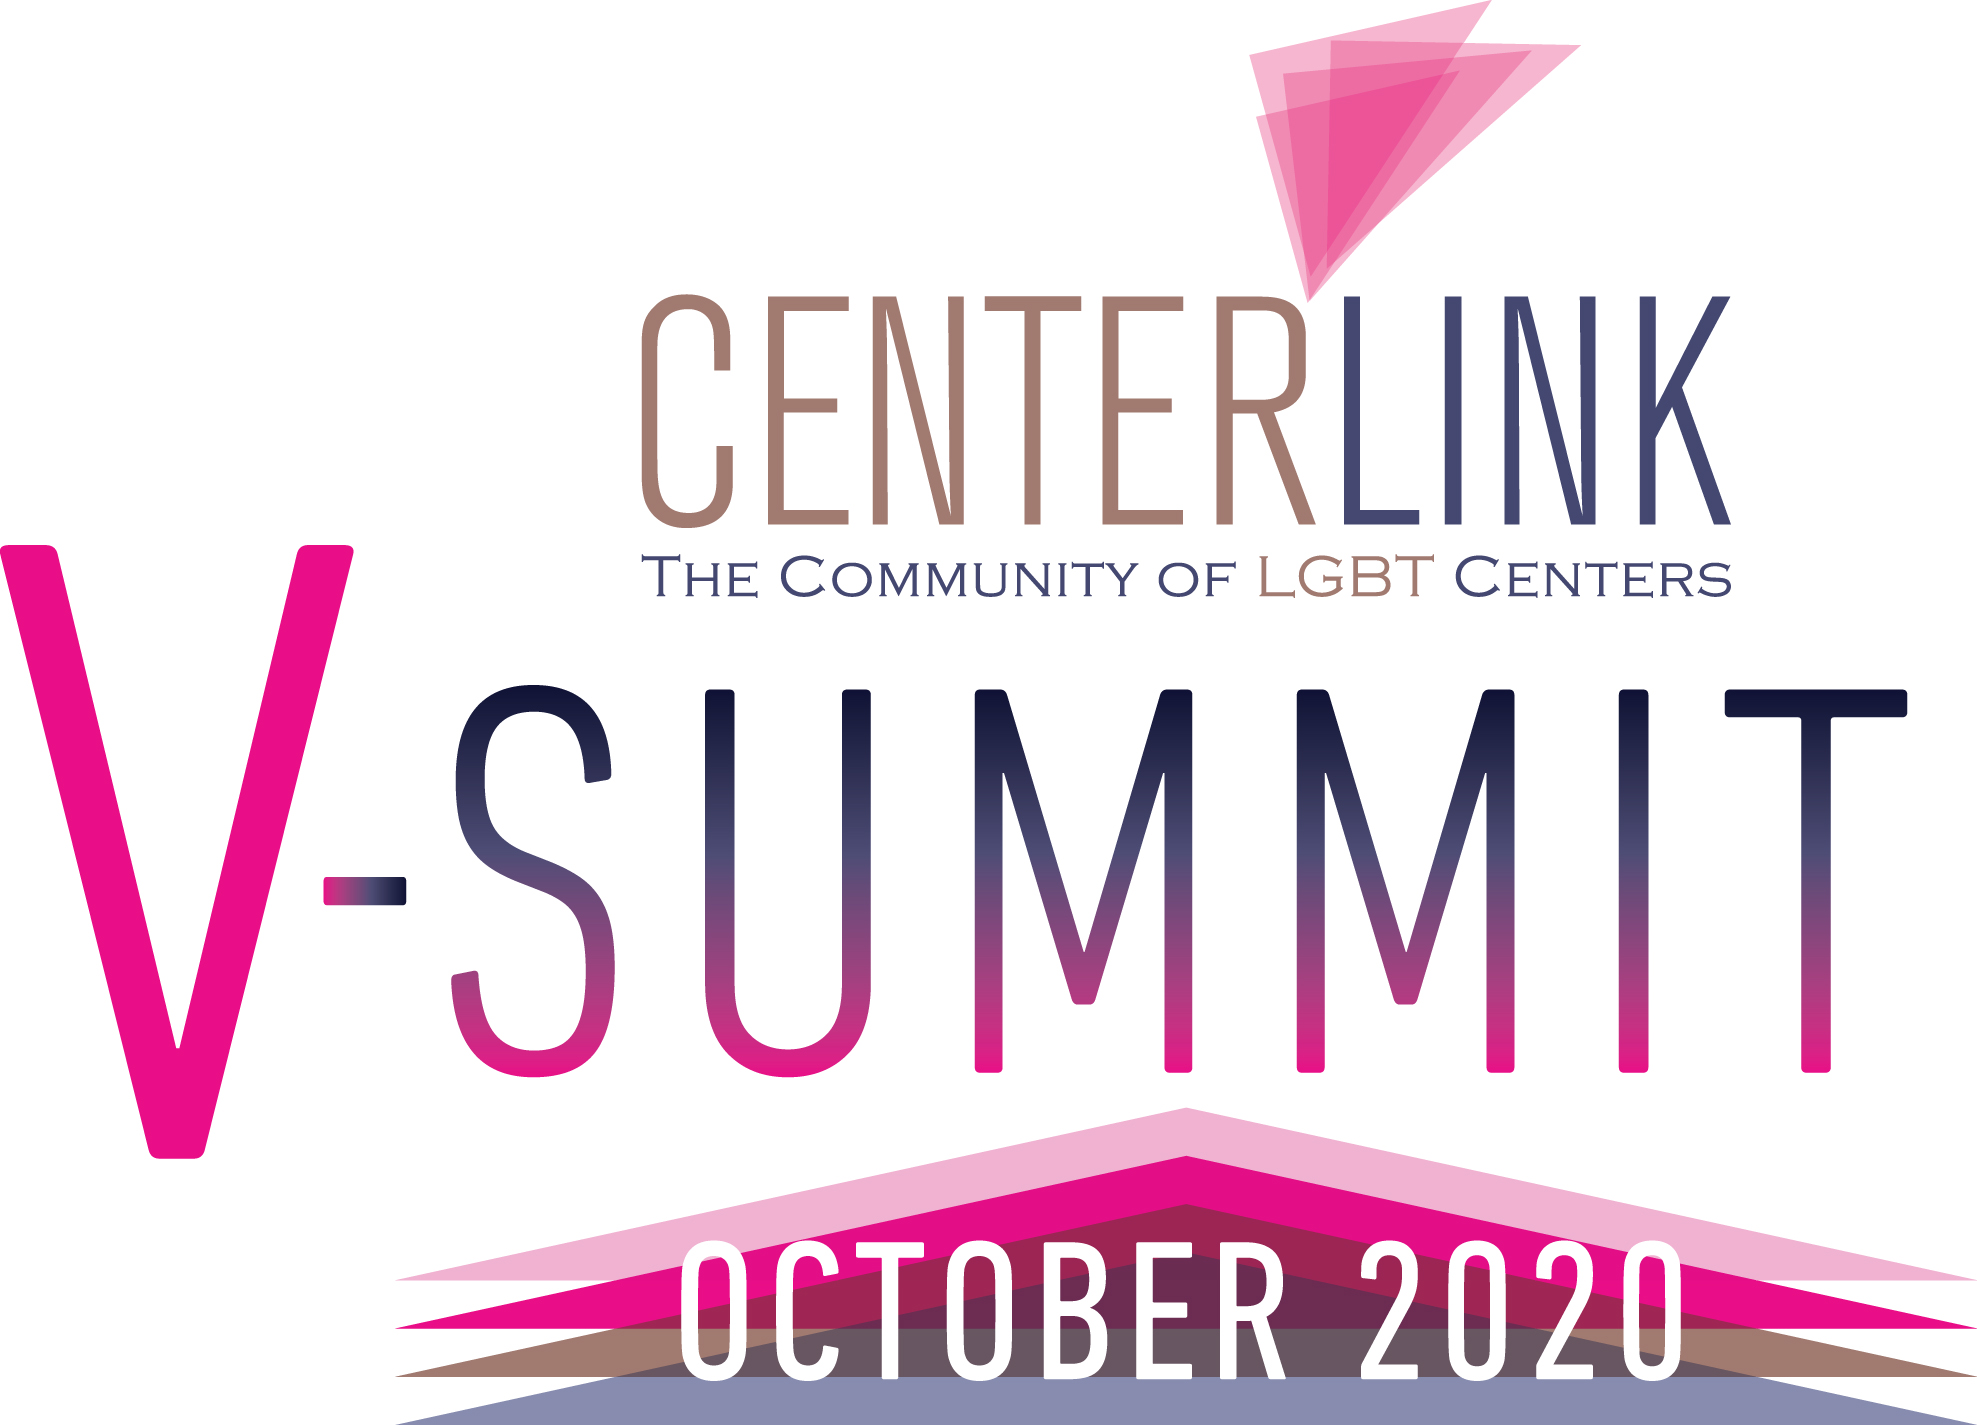 Special Edition!! Coverage of CenterInk’s V-Summit image